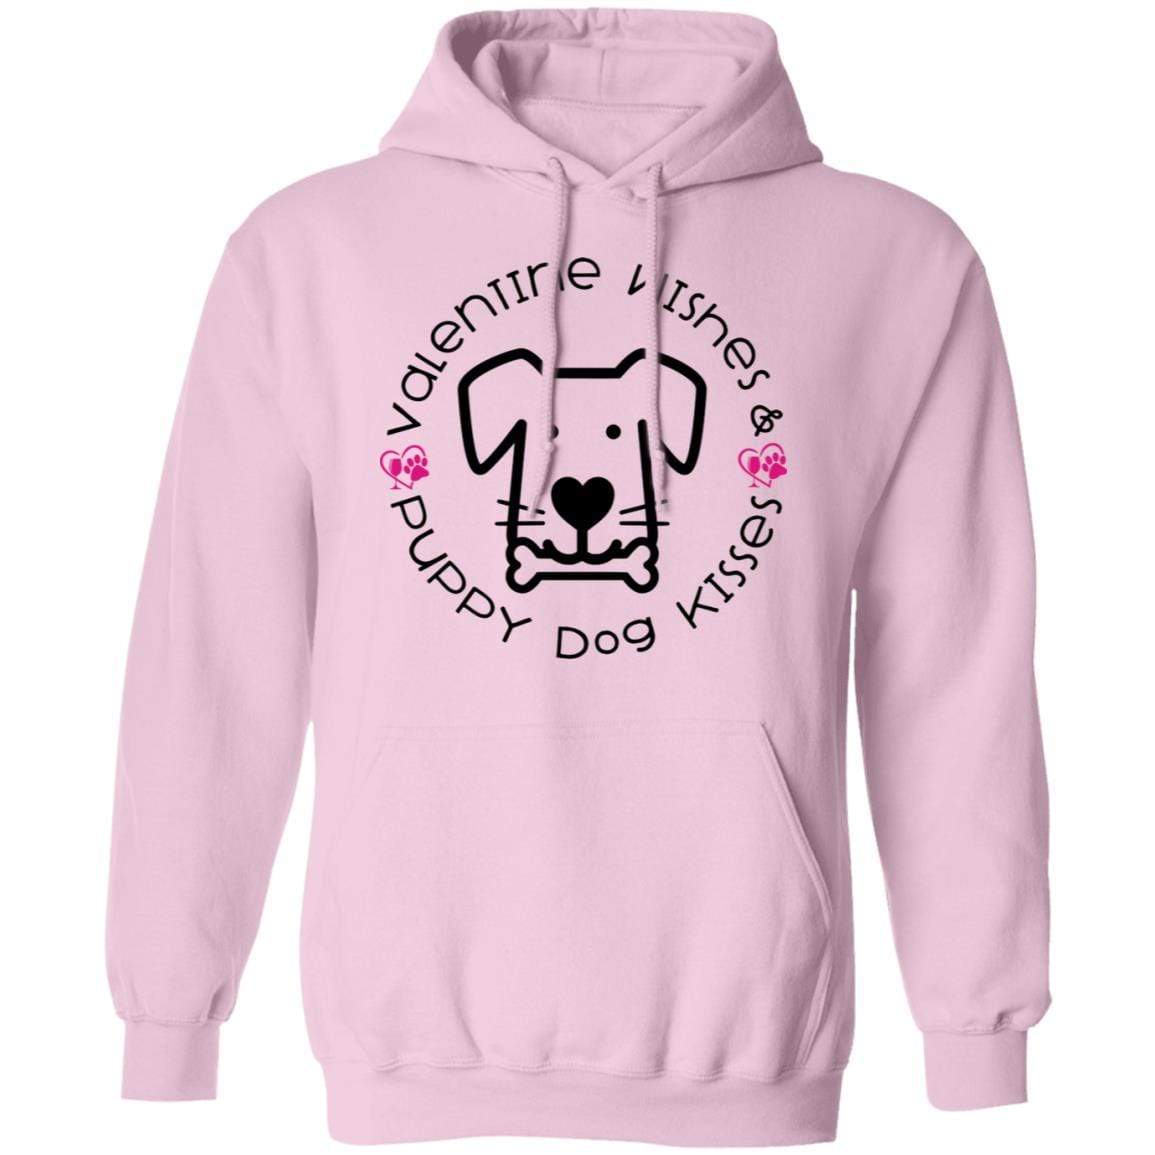 Sweatshirts Light Pink / S Winey Bitches Co Valentine Wishes and Puppy Dog Kisses" (Dog) Pullover Hoodie 8 oz. WineyBitchesCo